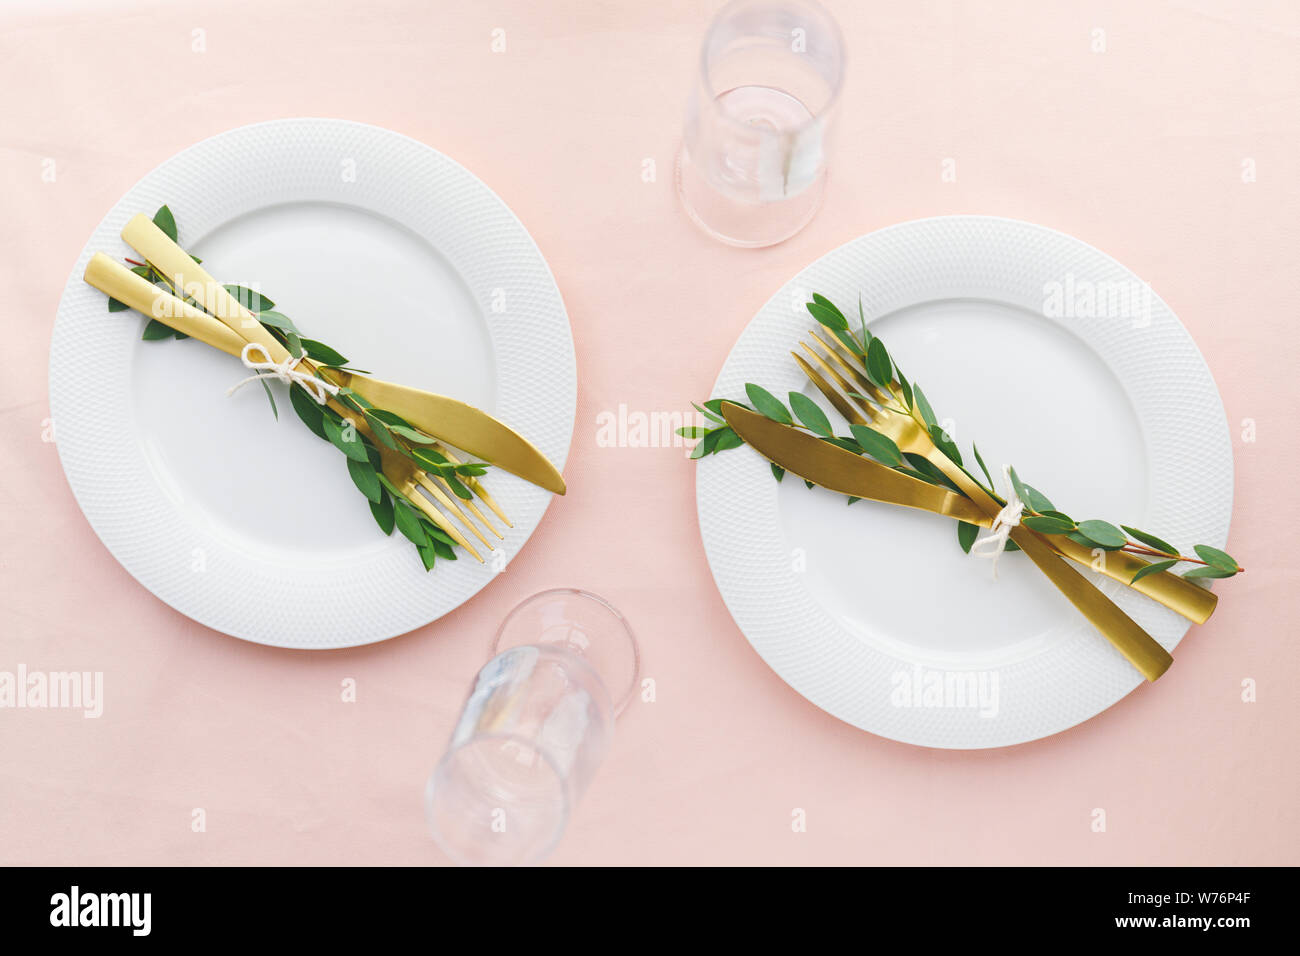 Festive table setting for celebrate event or family dinner with two plates and golden cutlery. Top view, flat lay. Stock Photo